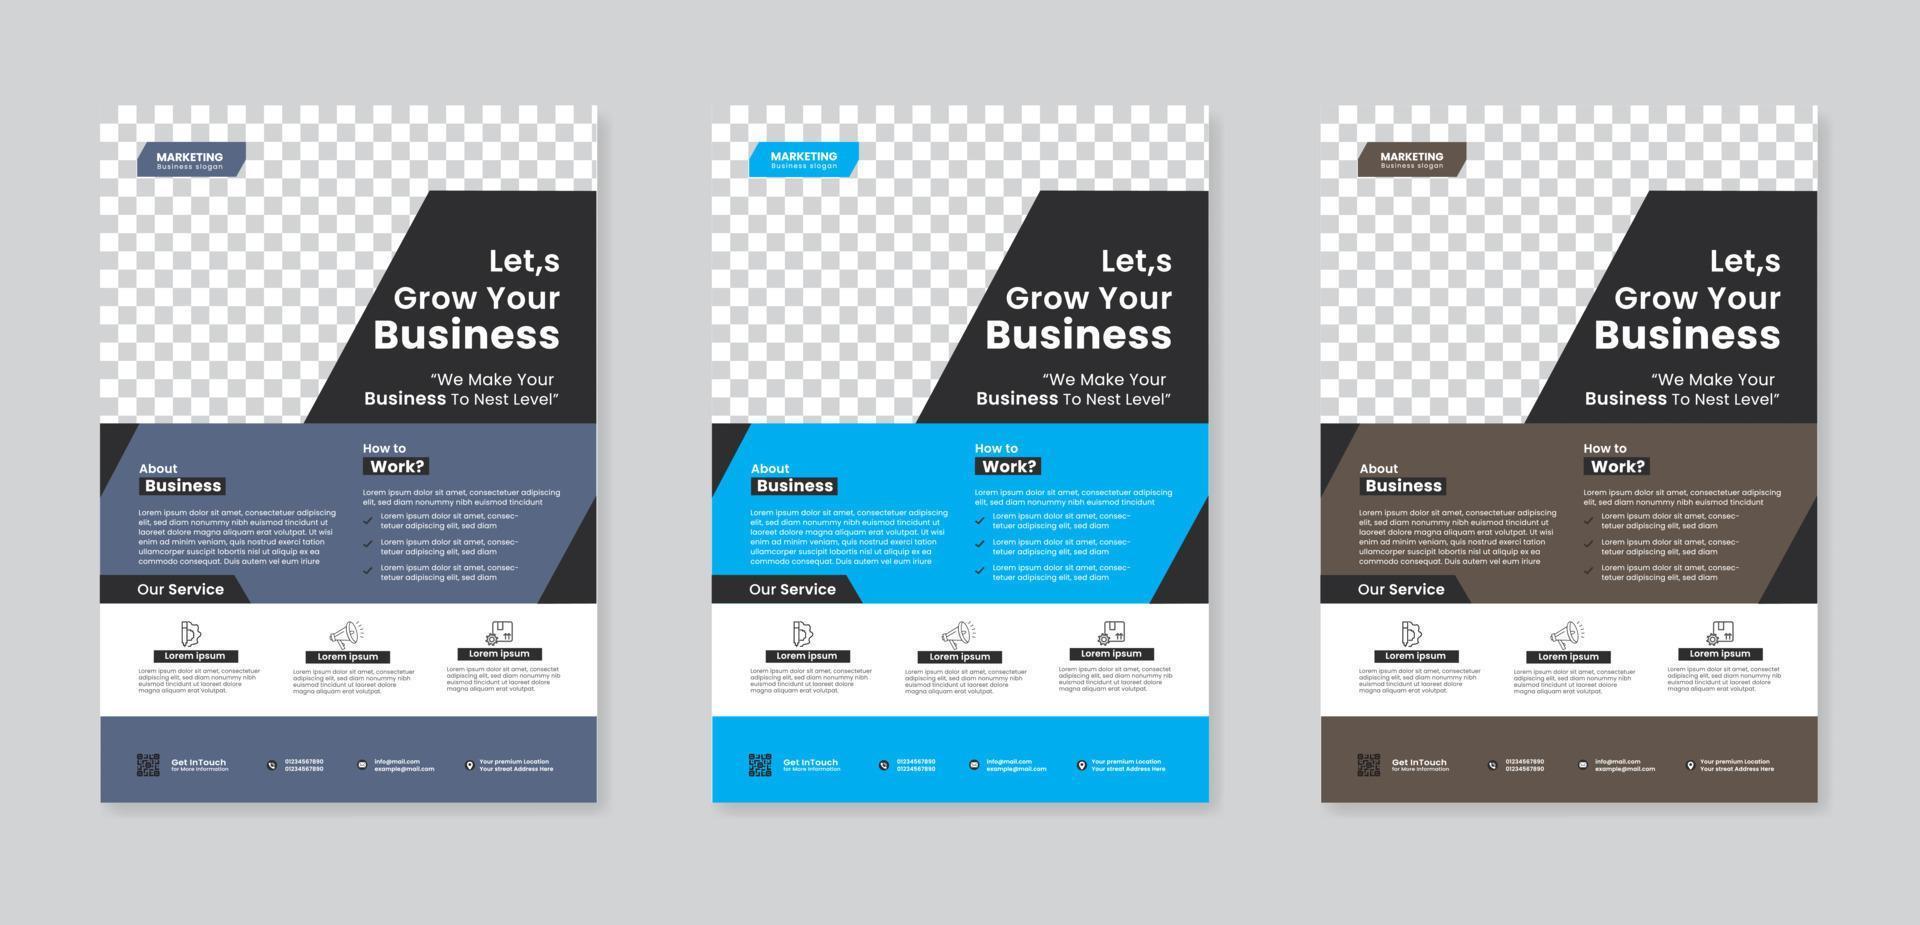 Corporate business flyer template design set with blue, magenta, advertise, marketing, business proposal, promotion, publication, Vector eco flyer, IT Company flyer , Geometric shape, and leaflets.